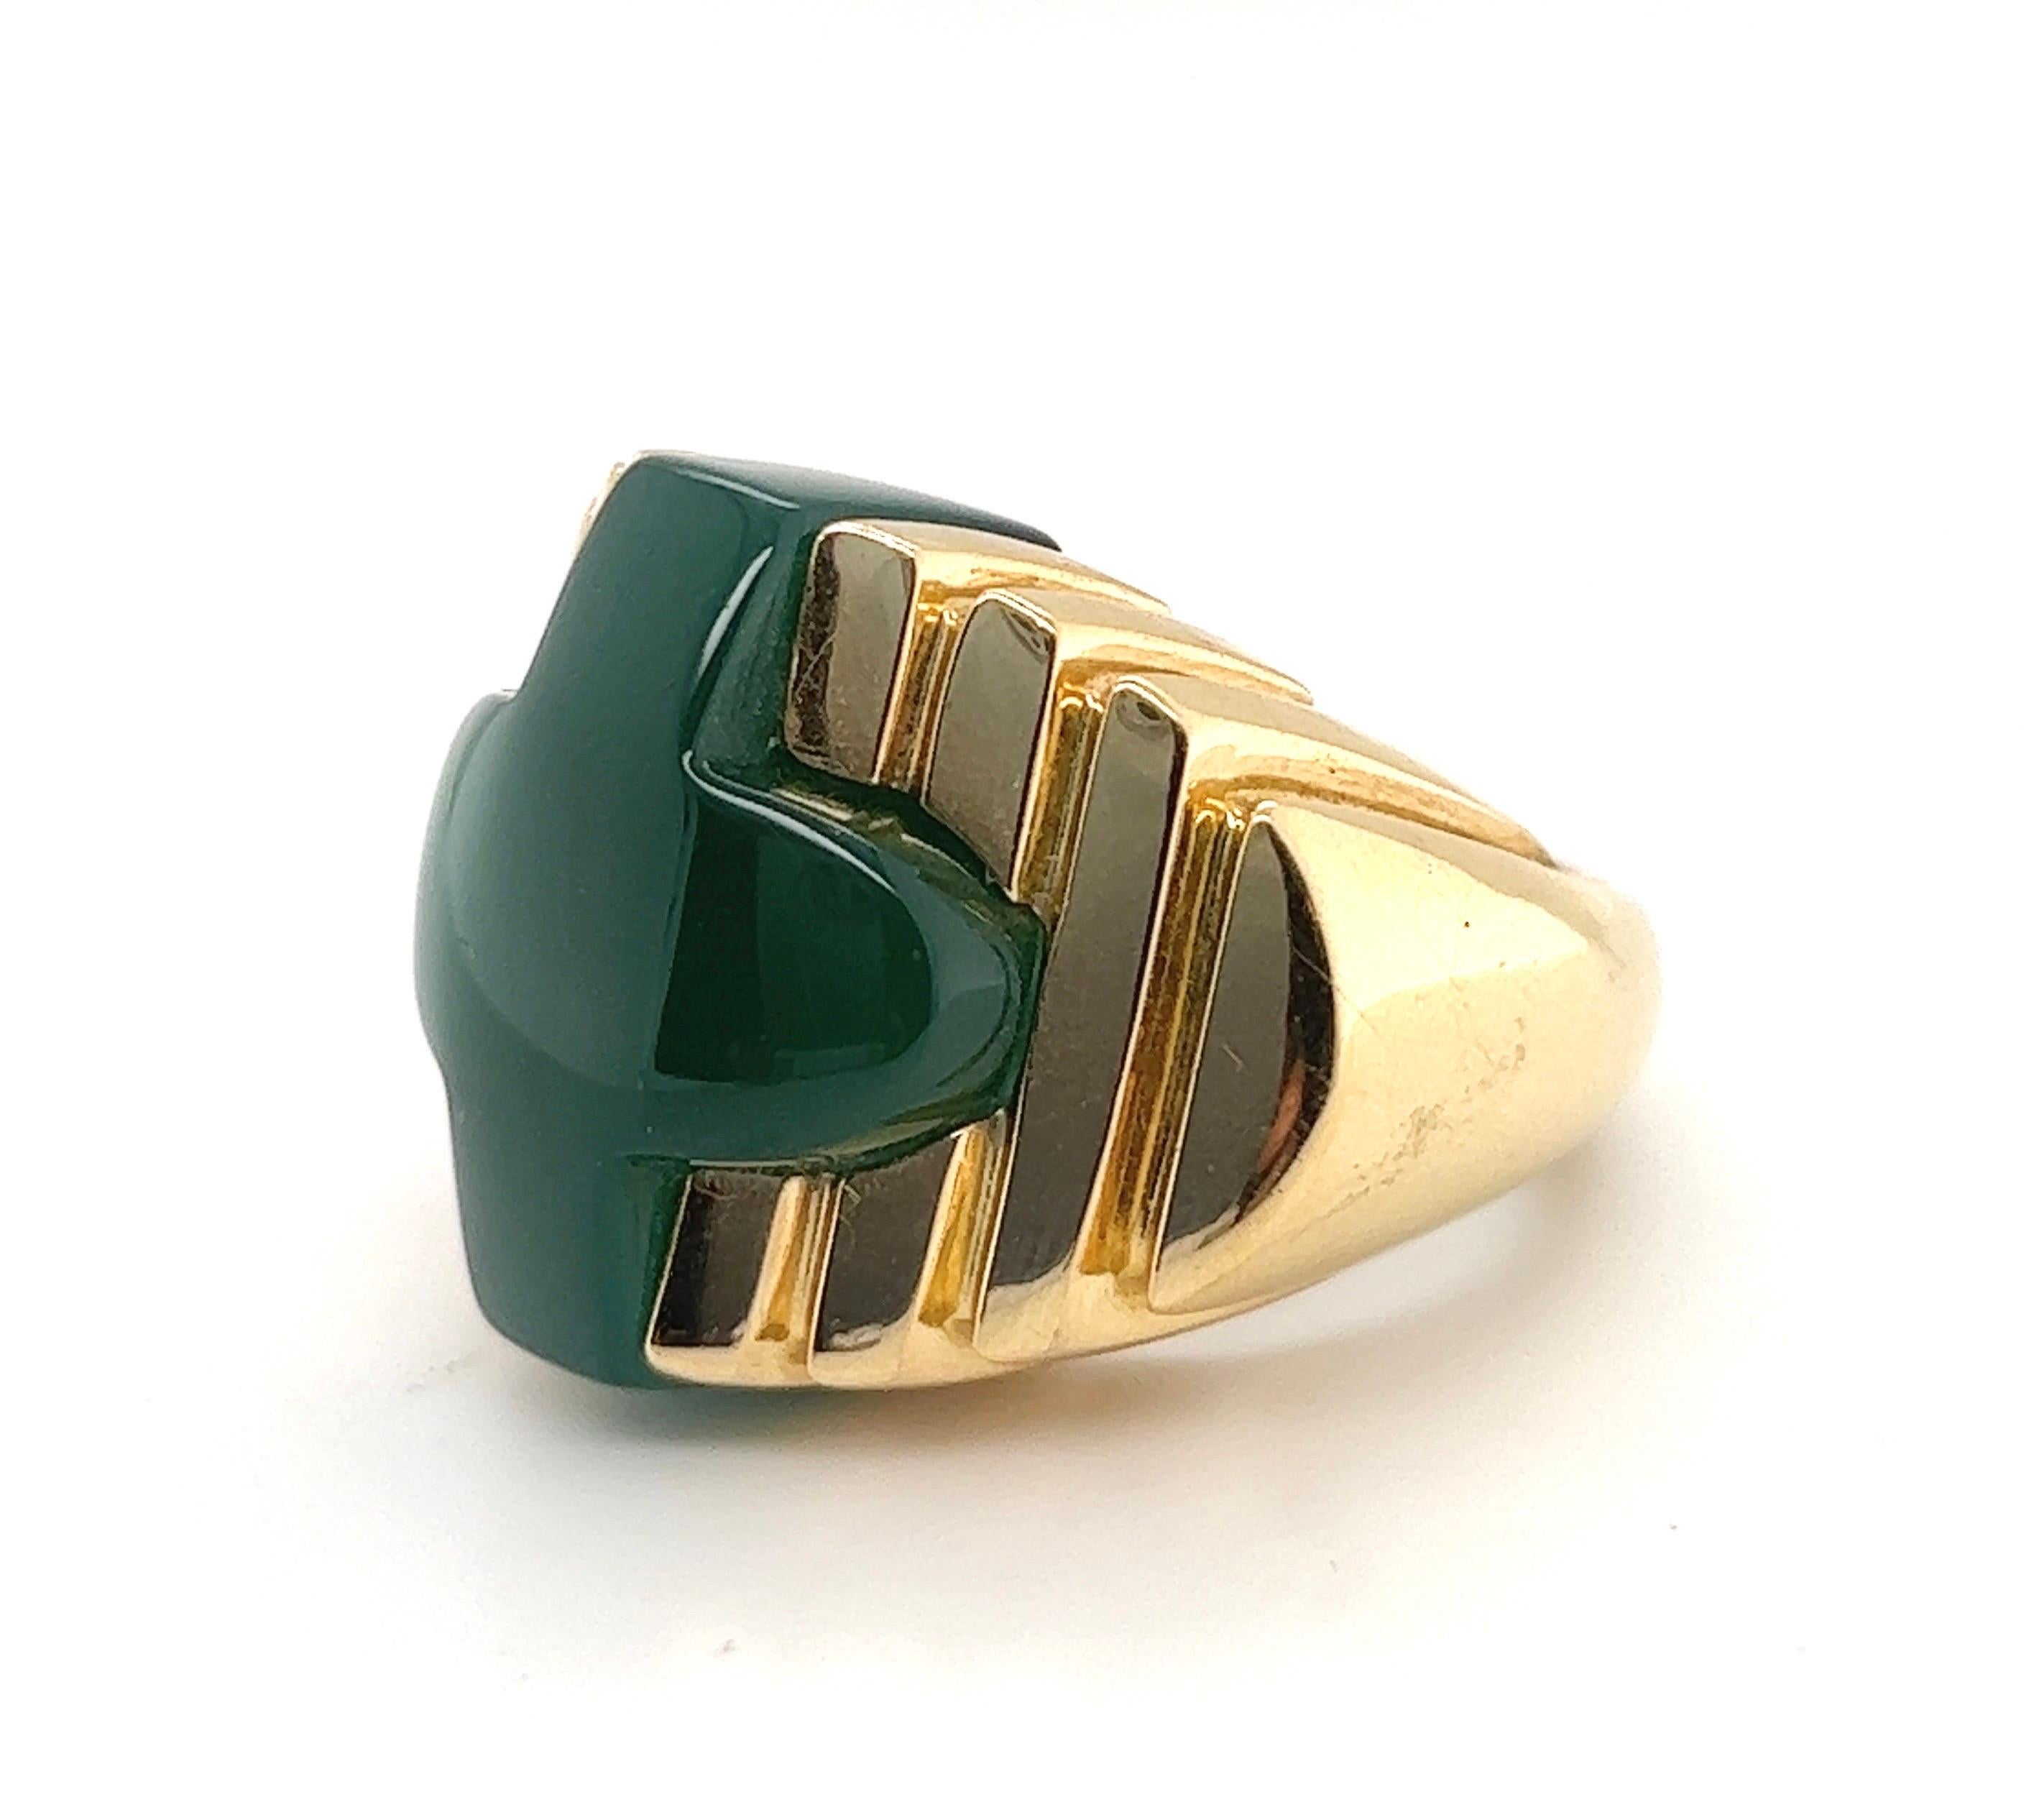 Rare sculptural geometric 18 karat yellow gold and green agate cocktail ring by Aldo Cipullo for Cartier, 1971.

Masterfully crafted in 18 karat solid yellow gold and of high polish finish. The main body consists in a bold cruciform carving of